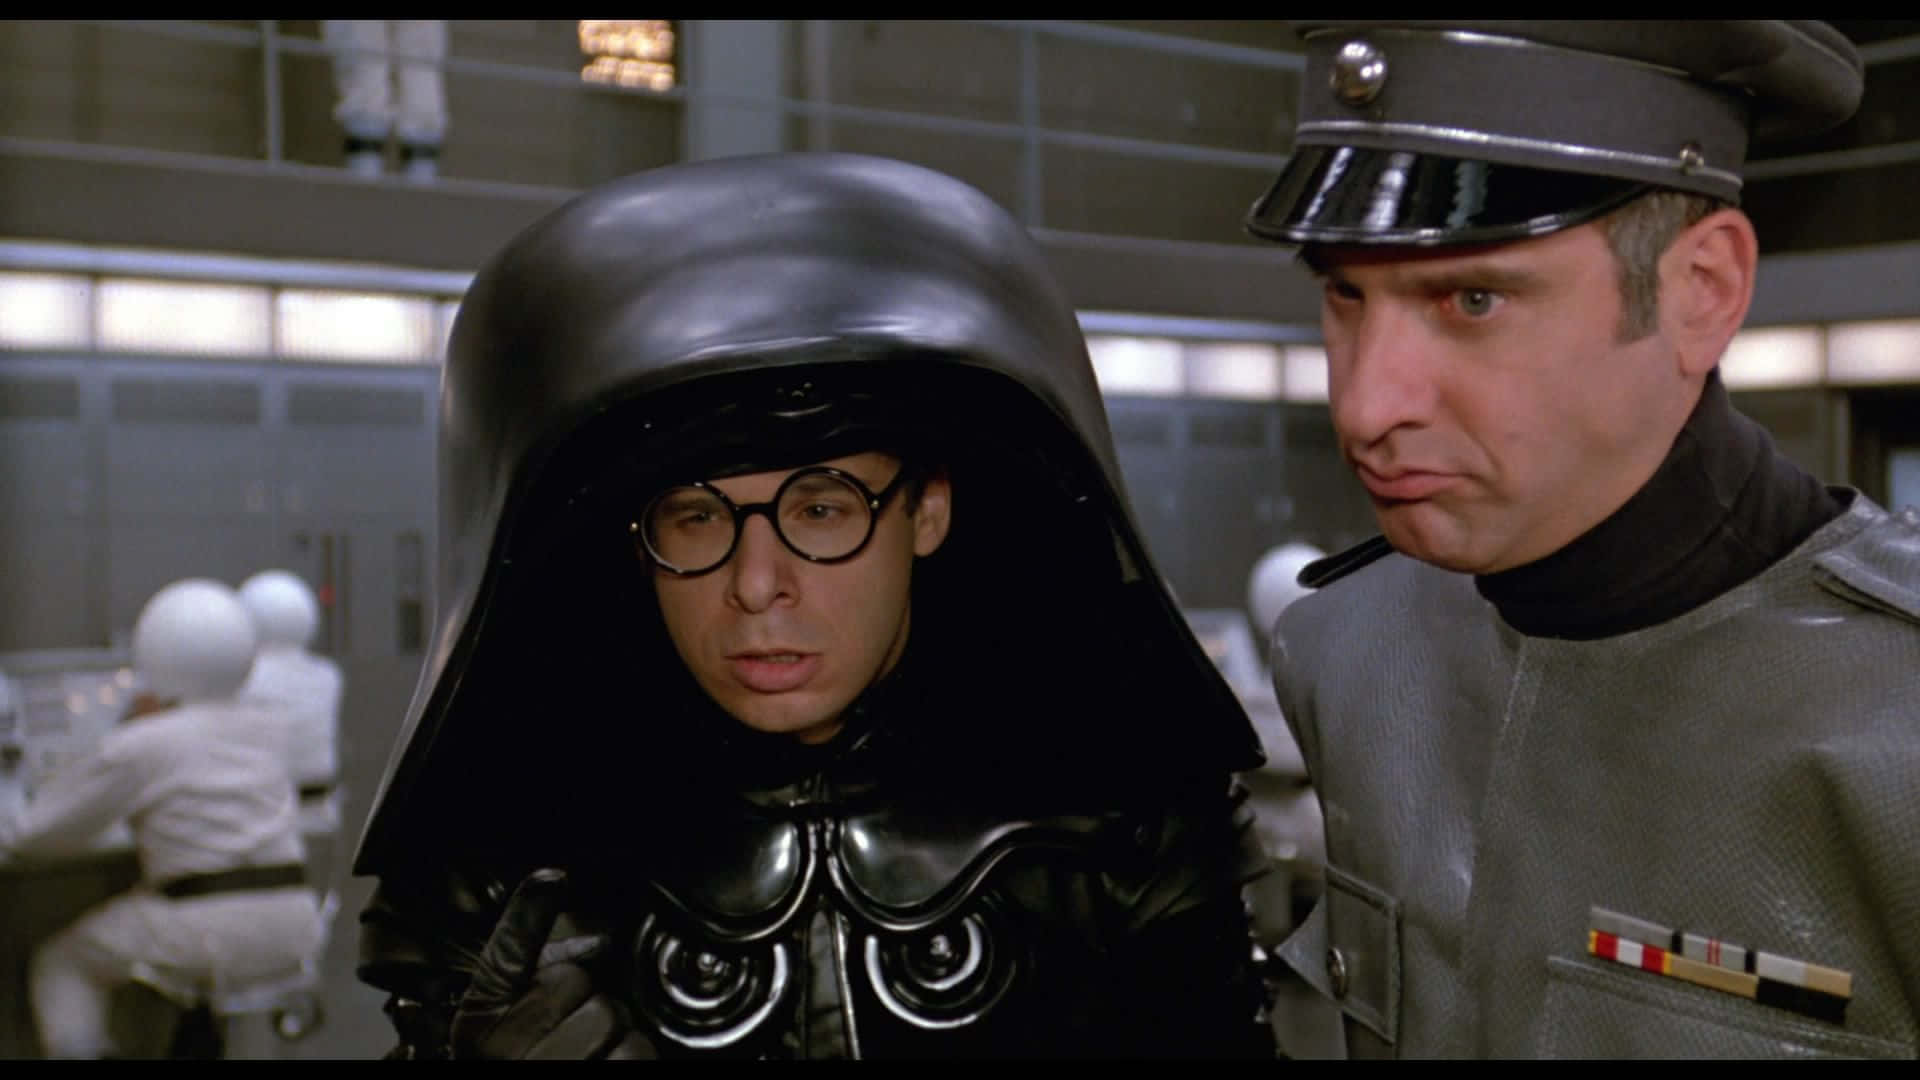 "The heroes of Spaceballs attempt to save the day" Wallpaper